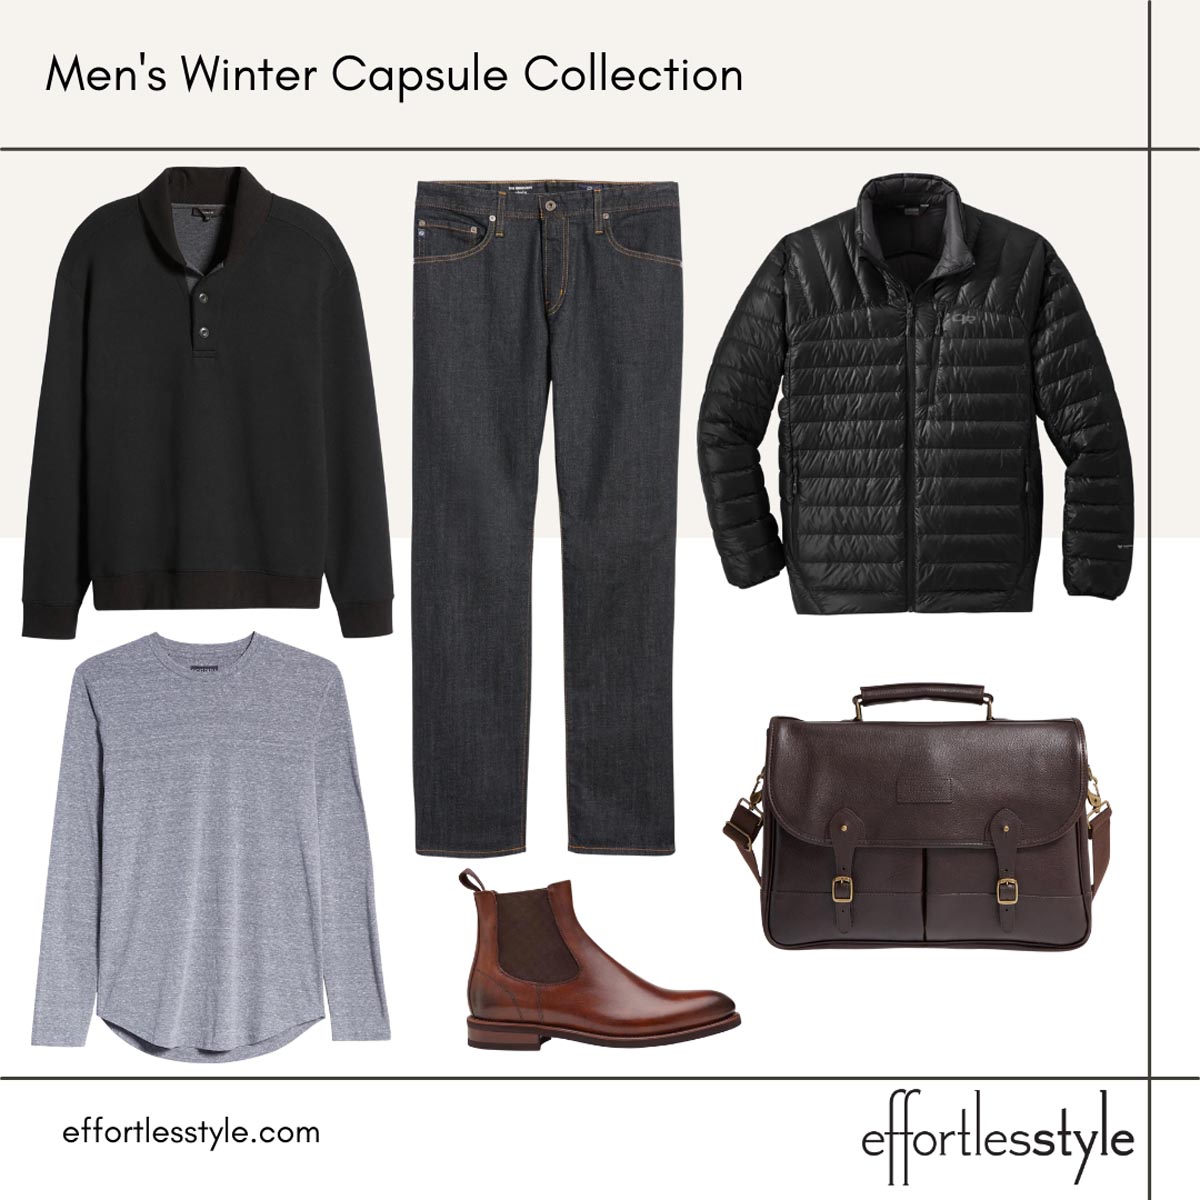 Men's Winter Capsule Collection Styled Looks shawl collar sweater how to wear a shawl collar sweater for men how to style a shawl collar sweater for guys how to wear a sweater with jeans and boots